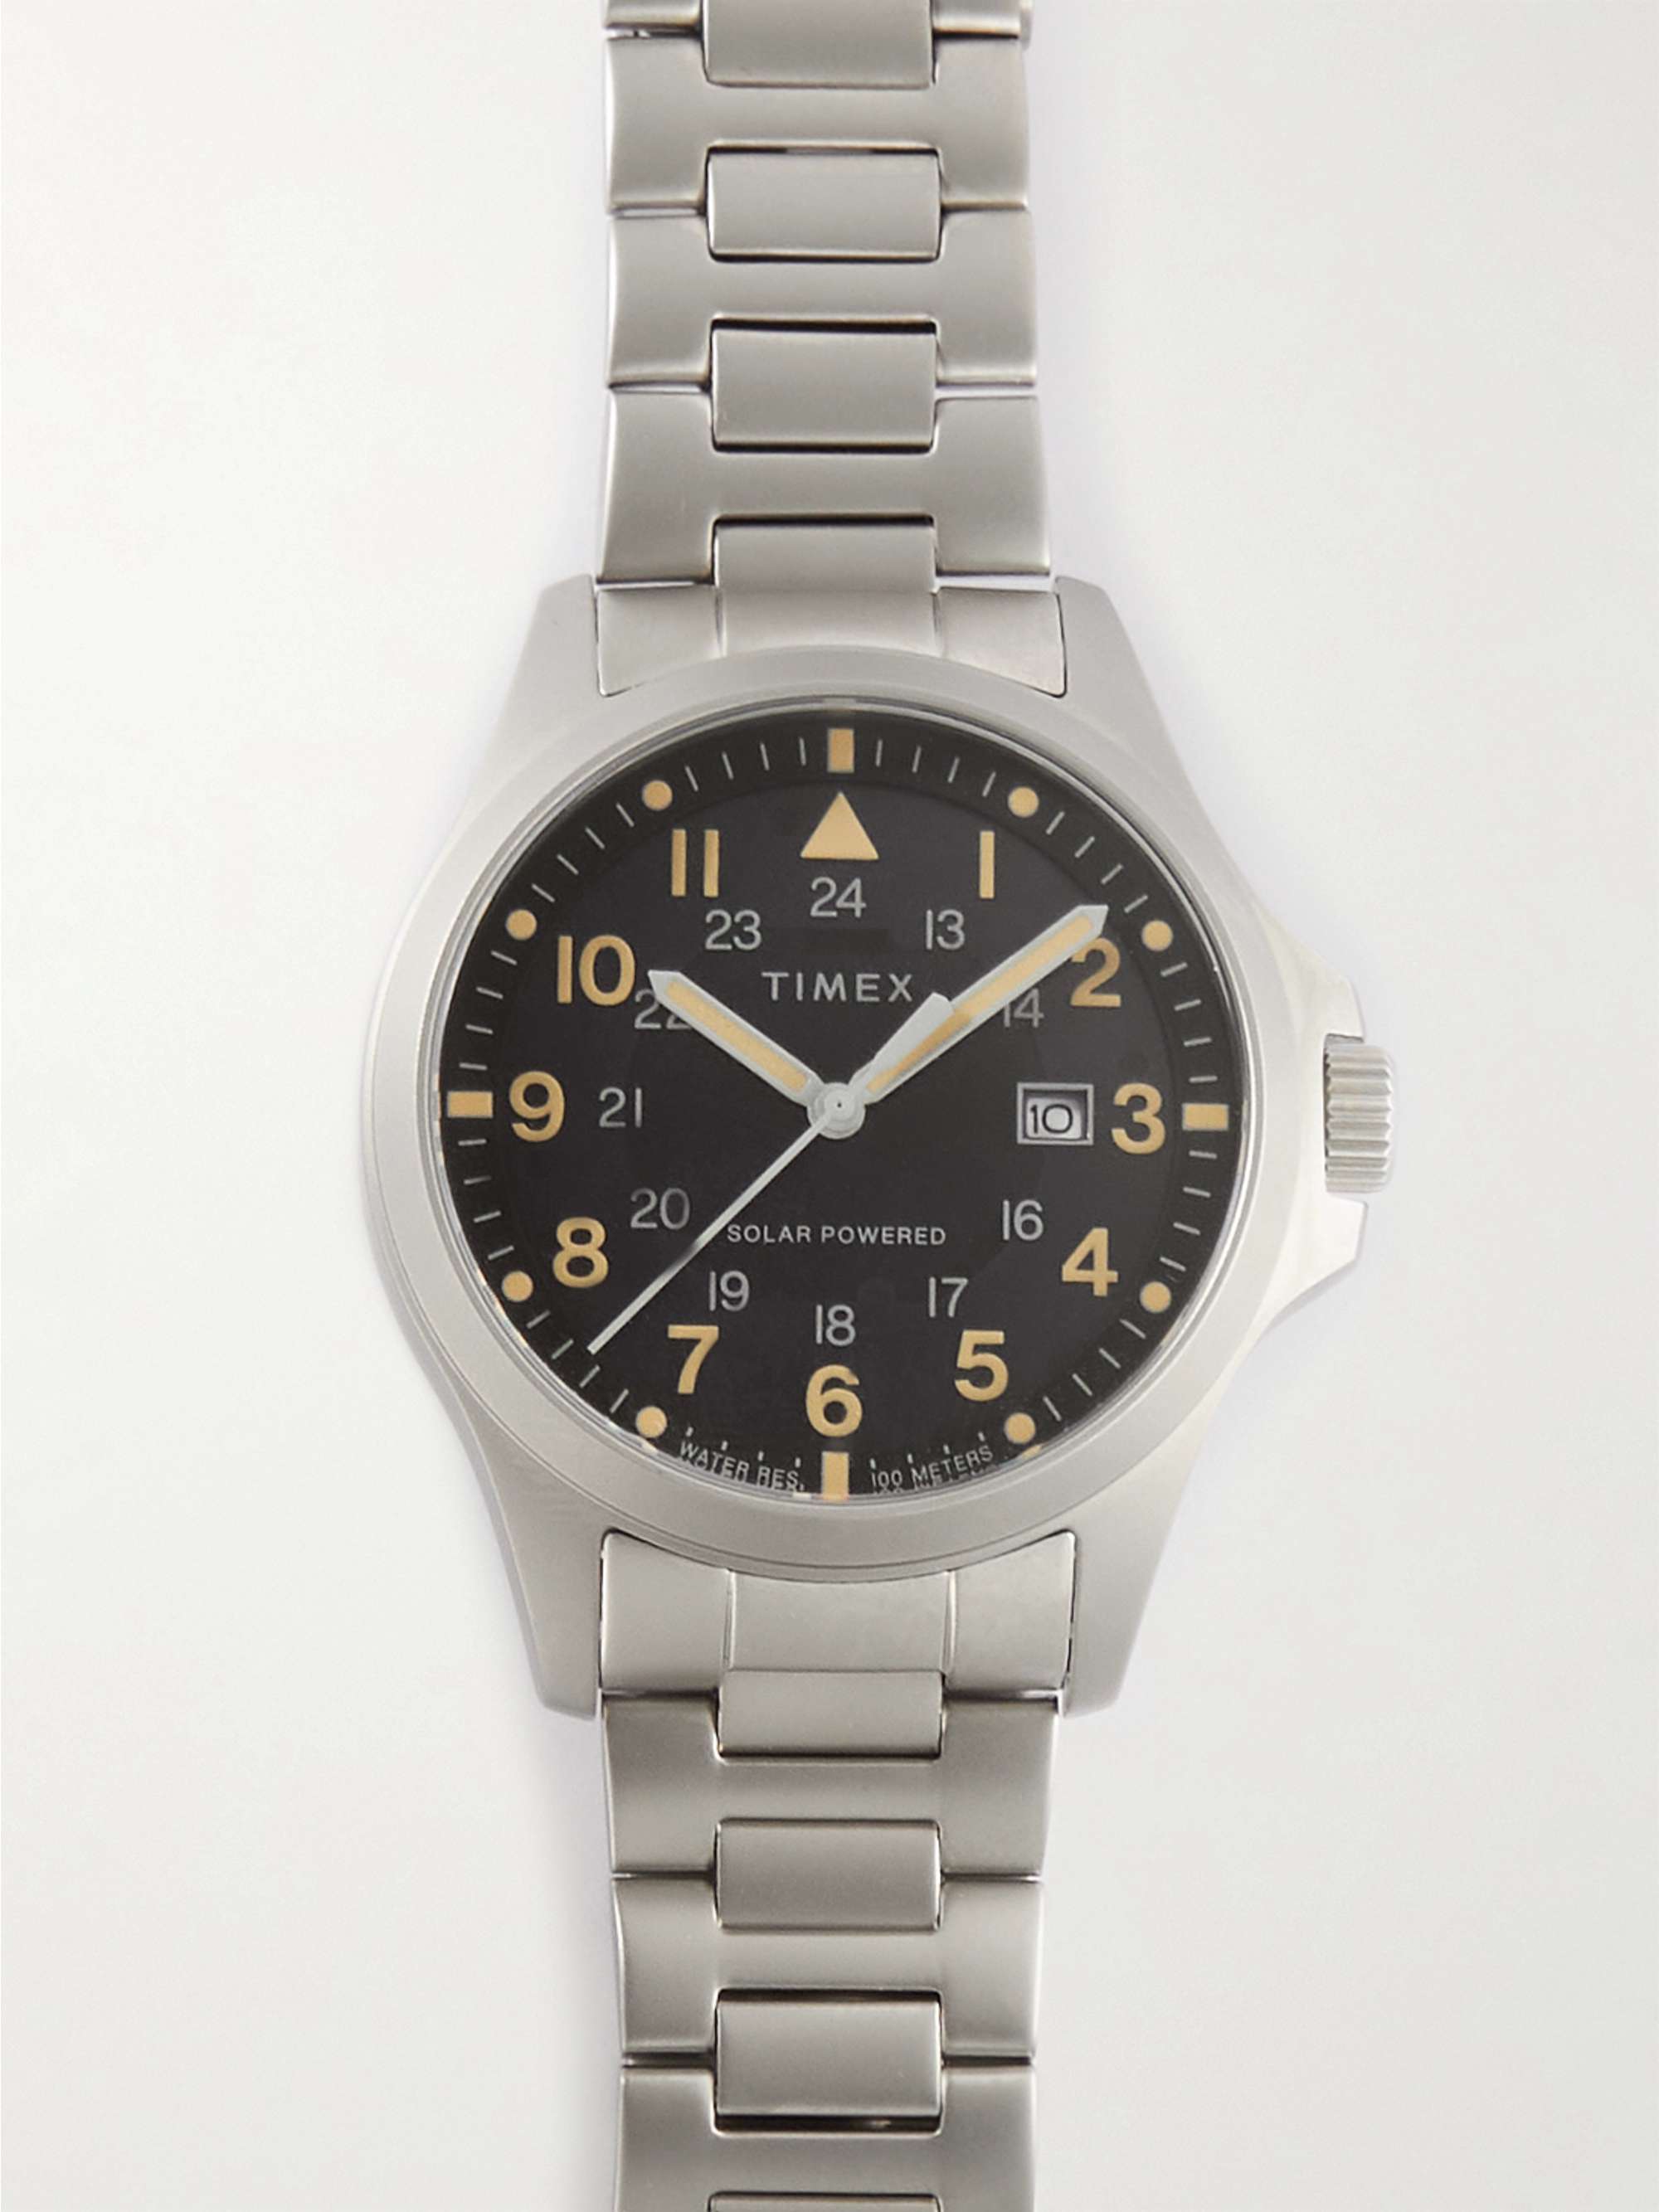 TIMEX Expedition North Field Solar 41mm Stainless Steel Watch